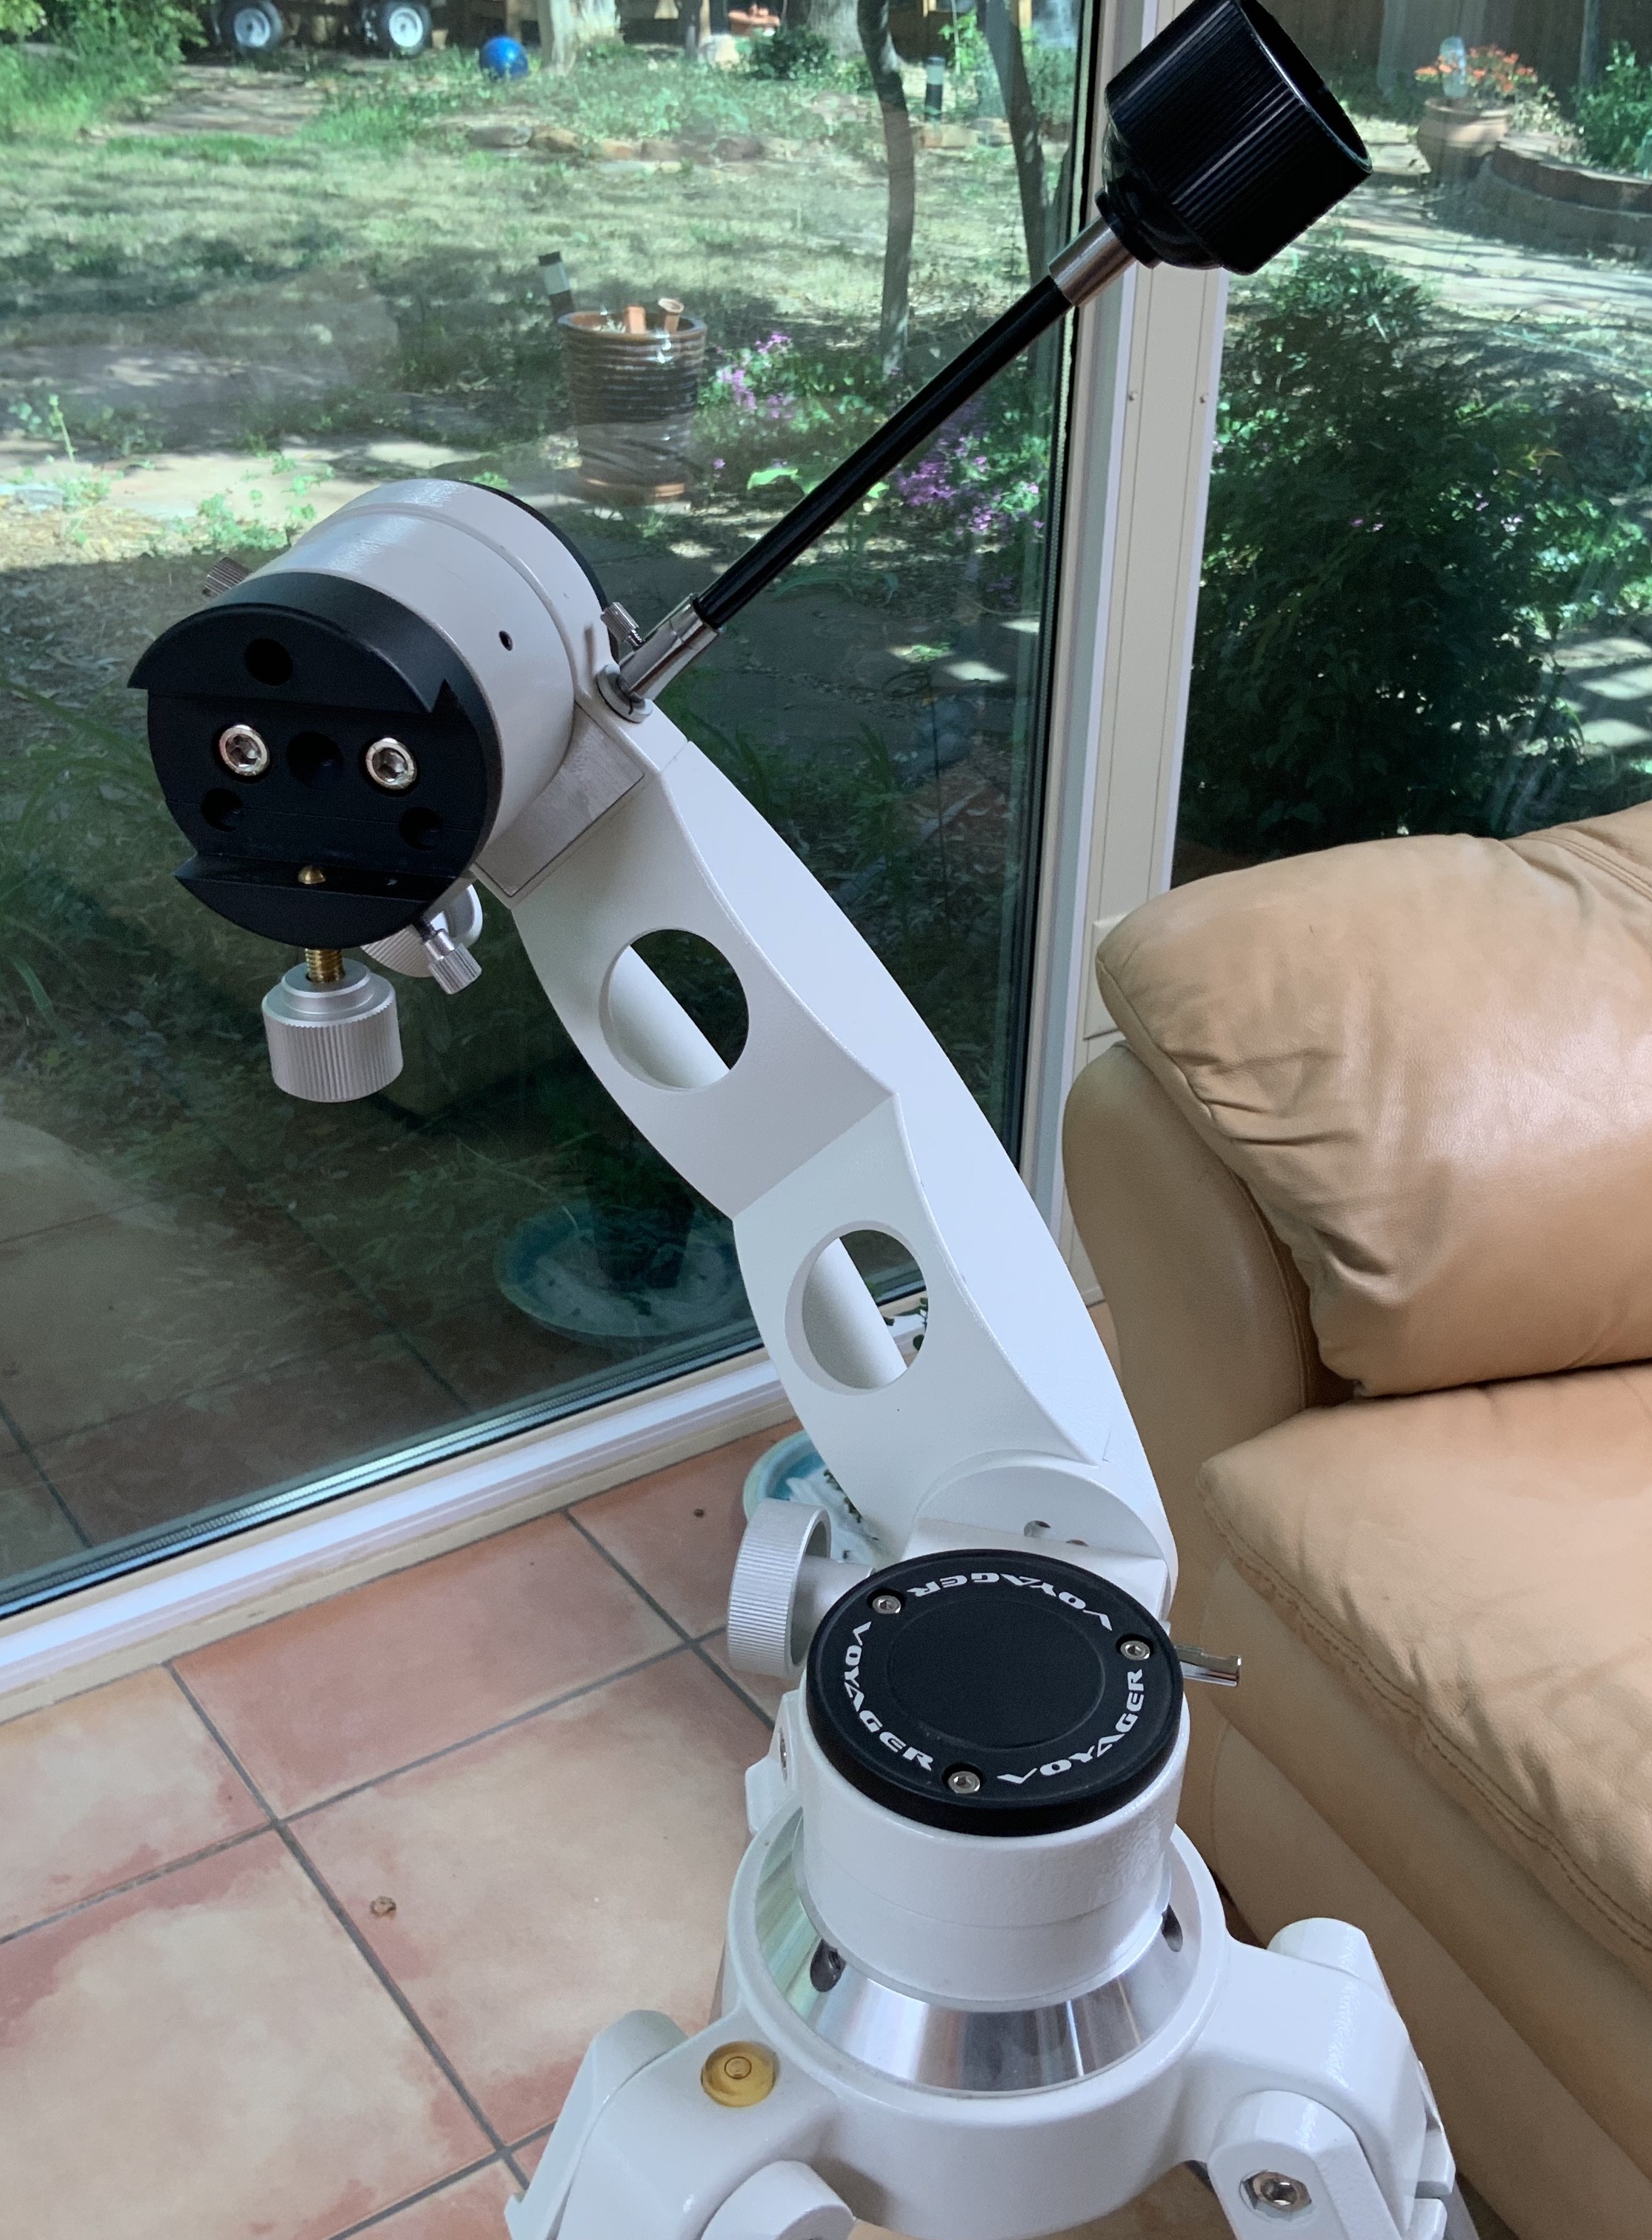 astro tech voyager mount